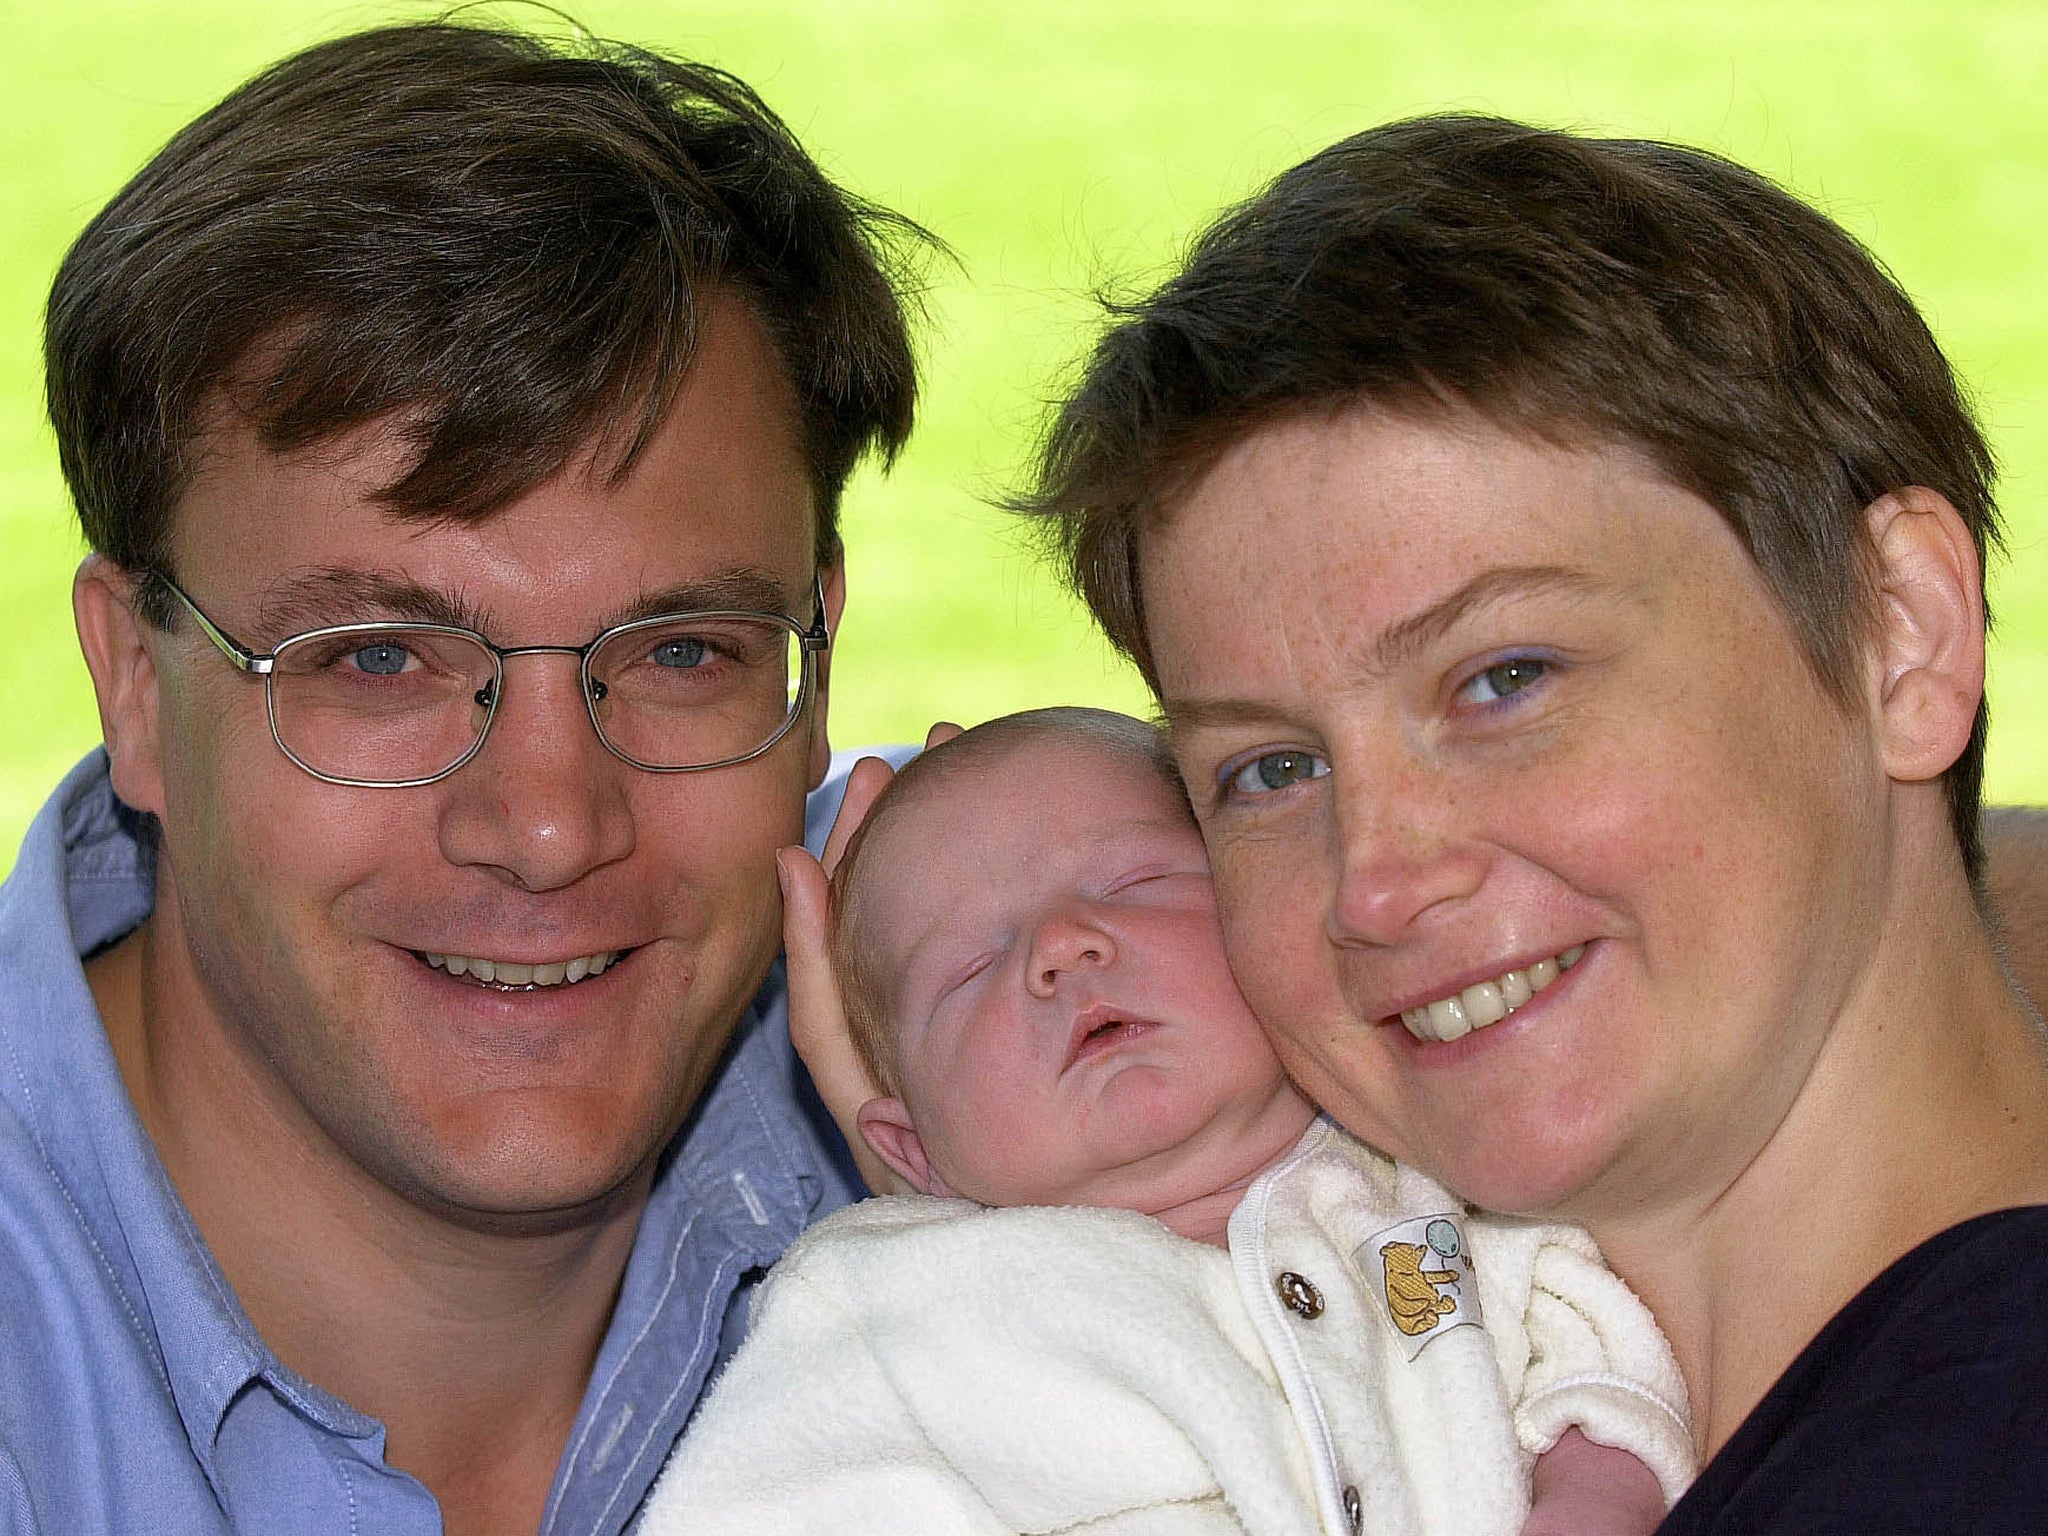 Yvette Cooper with her husband, Ed Balls, and Joel, their second child